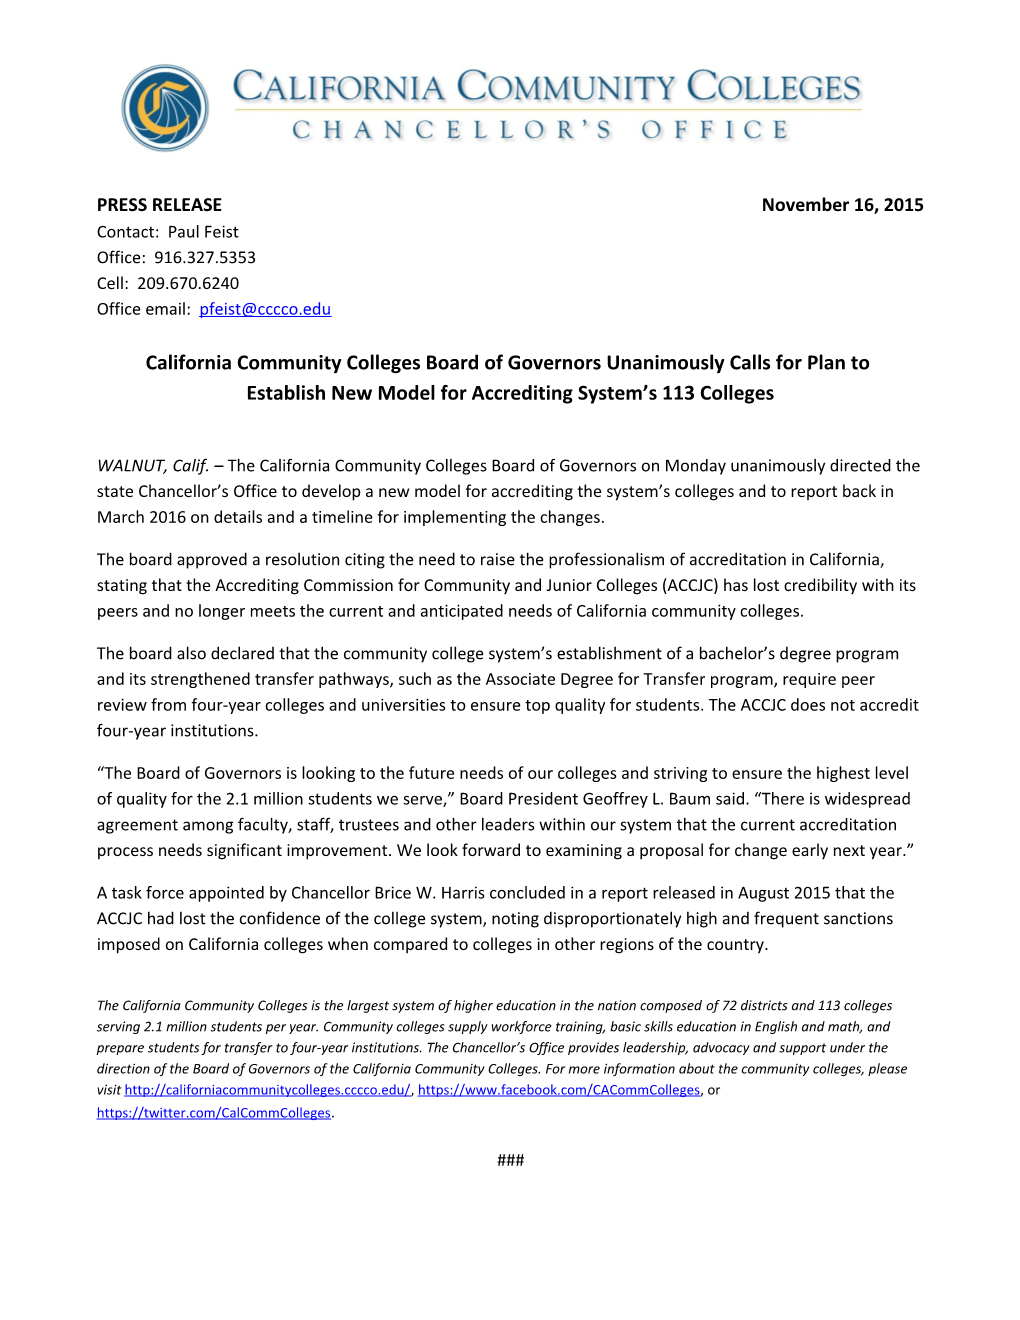 California Community Colleges Board of Governors Unanimously Calls for Plan To